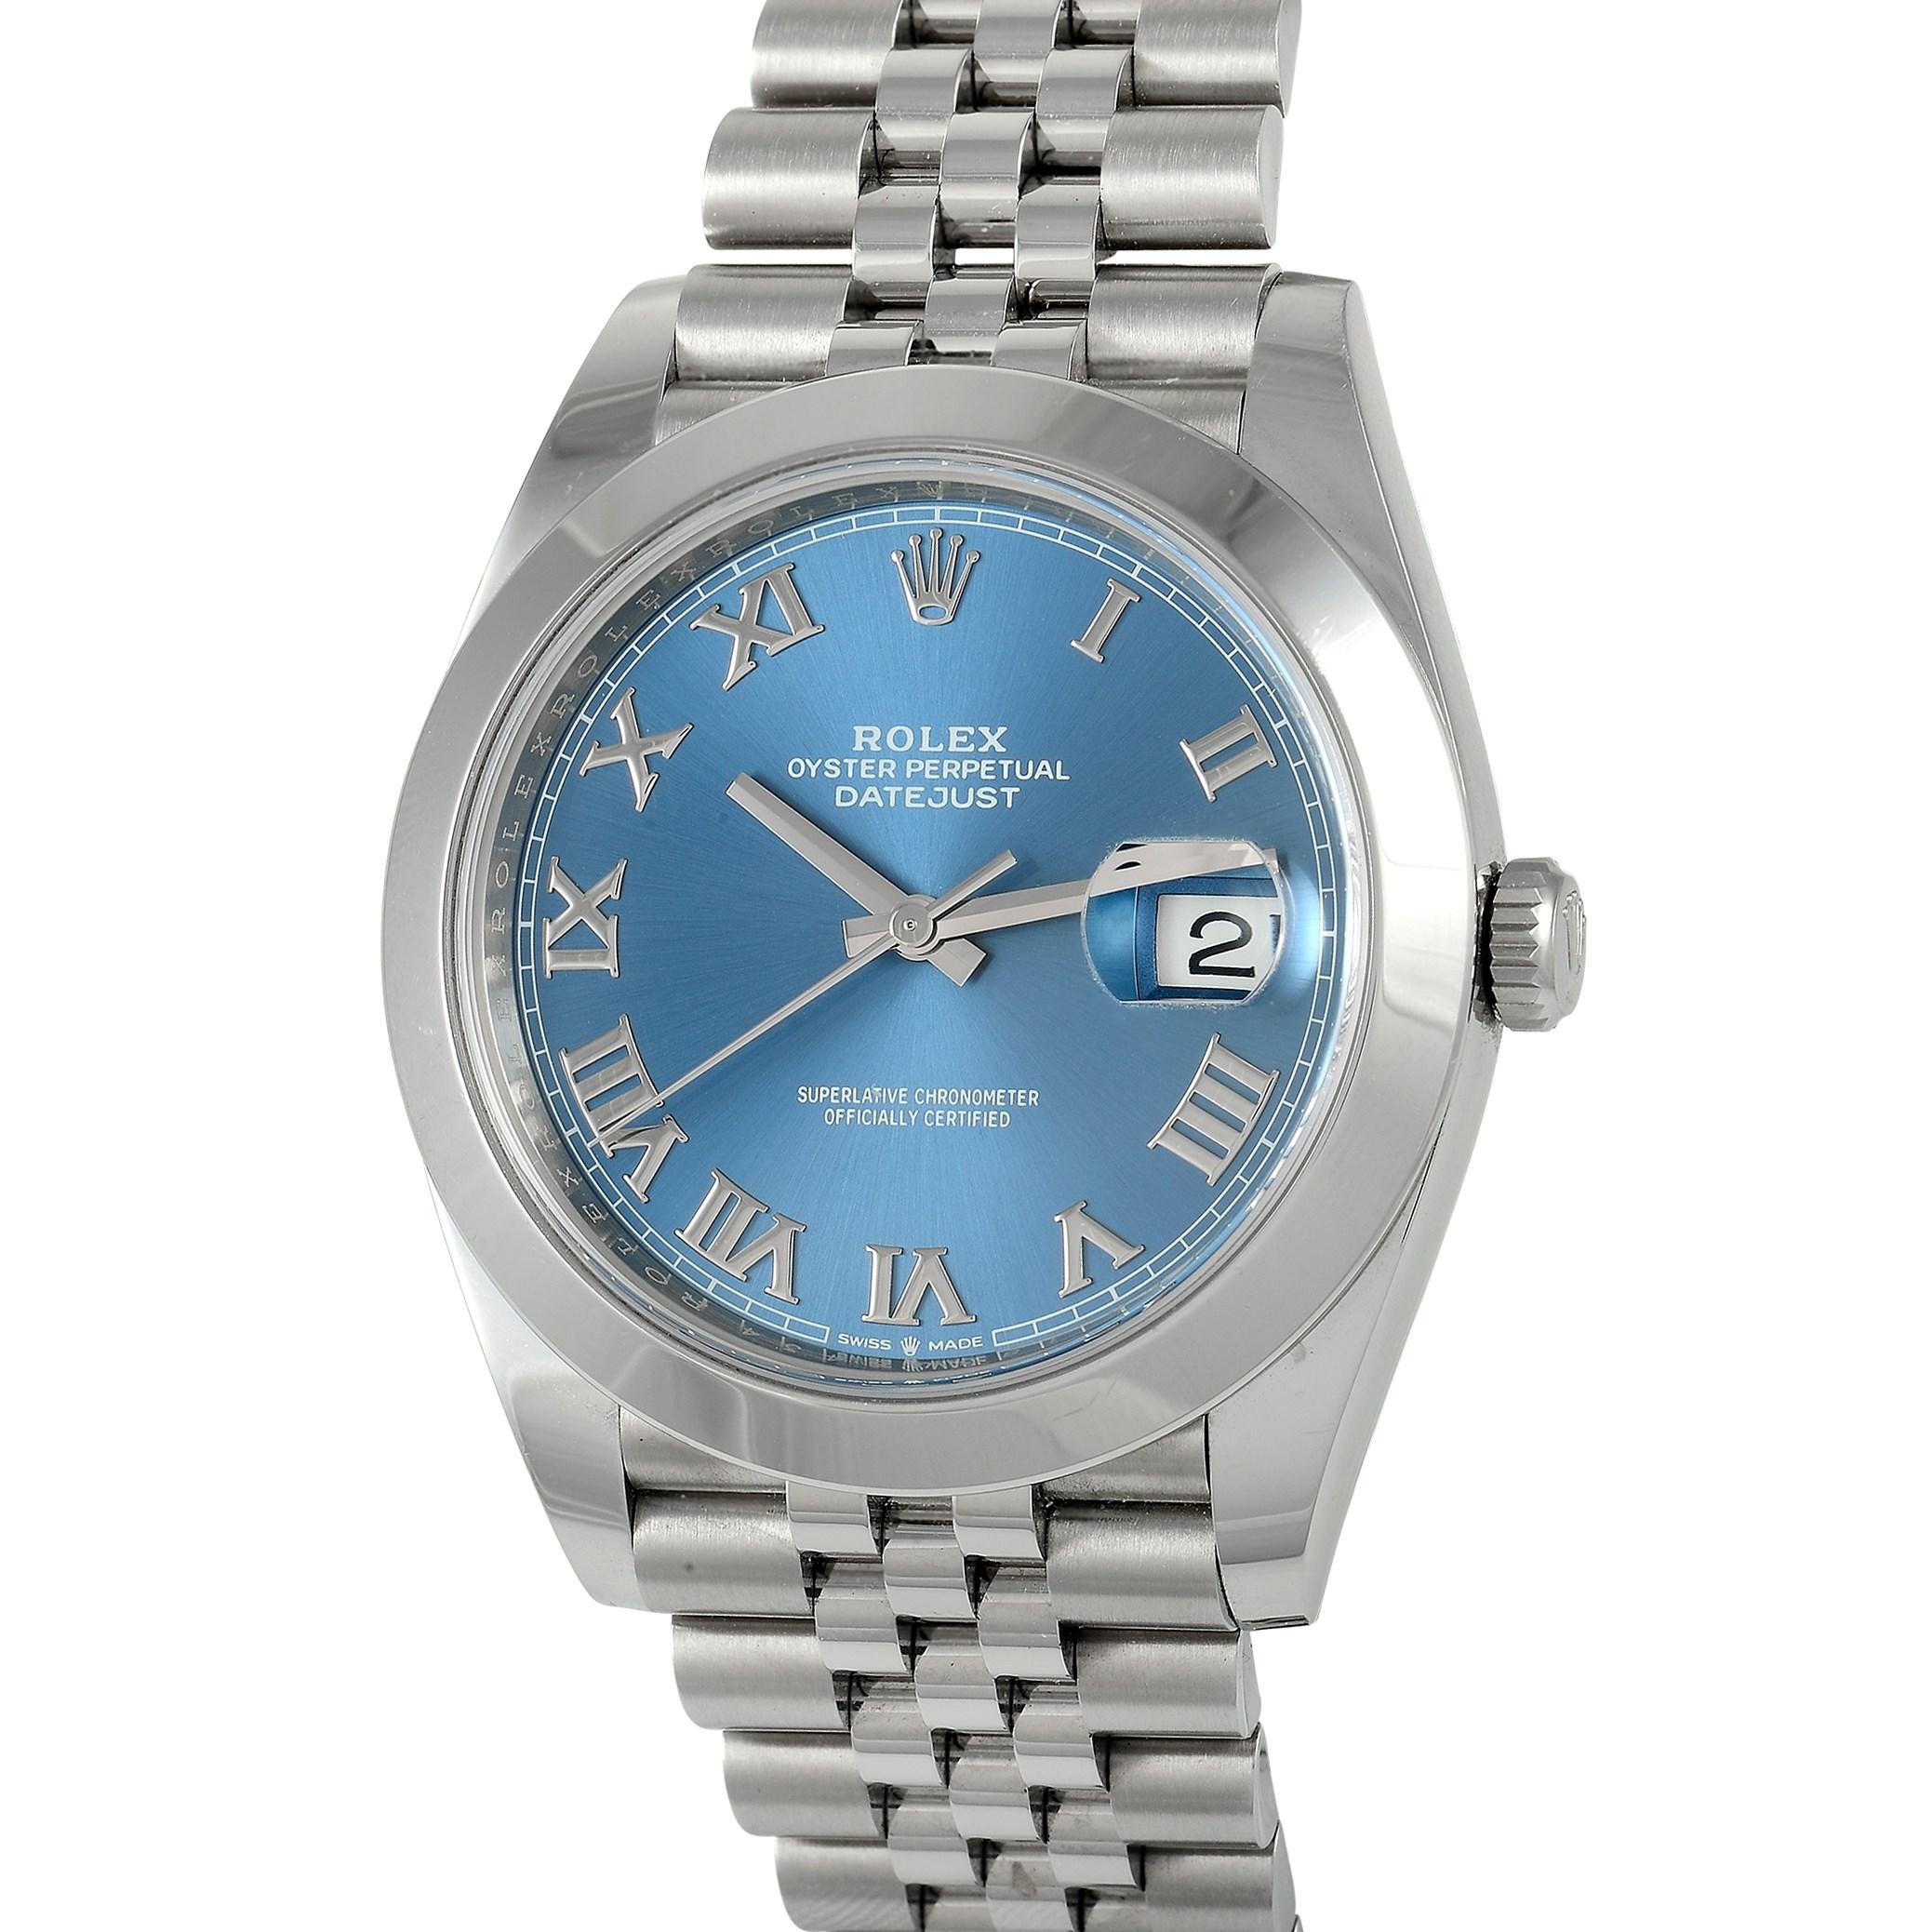 This Rolex Datejust 41 Blue Dial Stainless Steel Watch 126300 would make a fine everyday luxury watch. Its discreet yet luxurious appeal gives it that wear-with-anything character. The polished 41mm stainless steel case and smooth bezel are